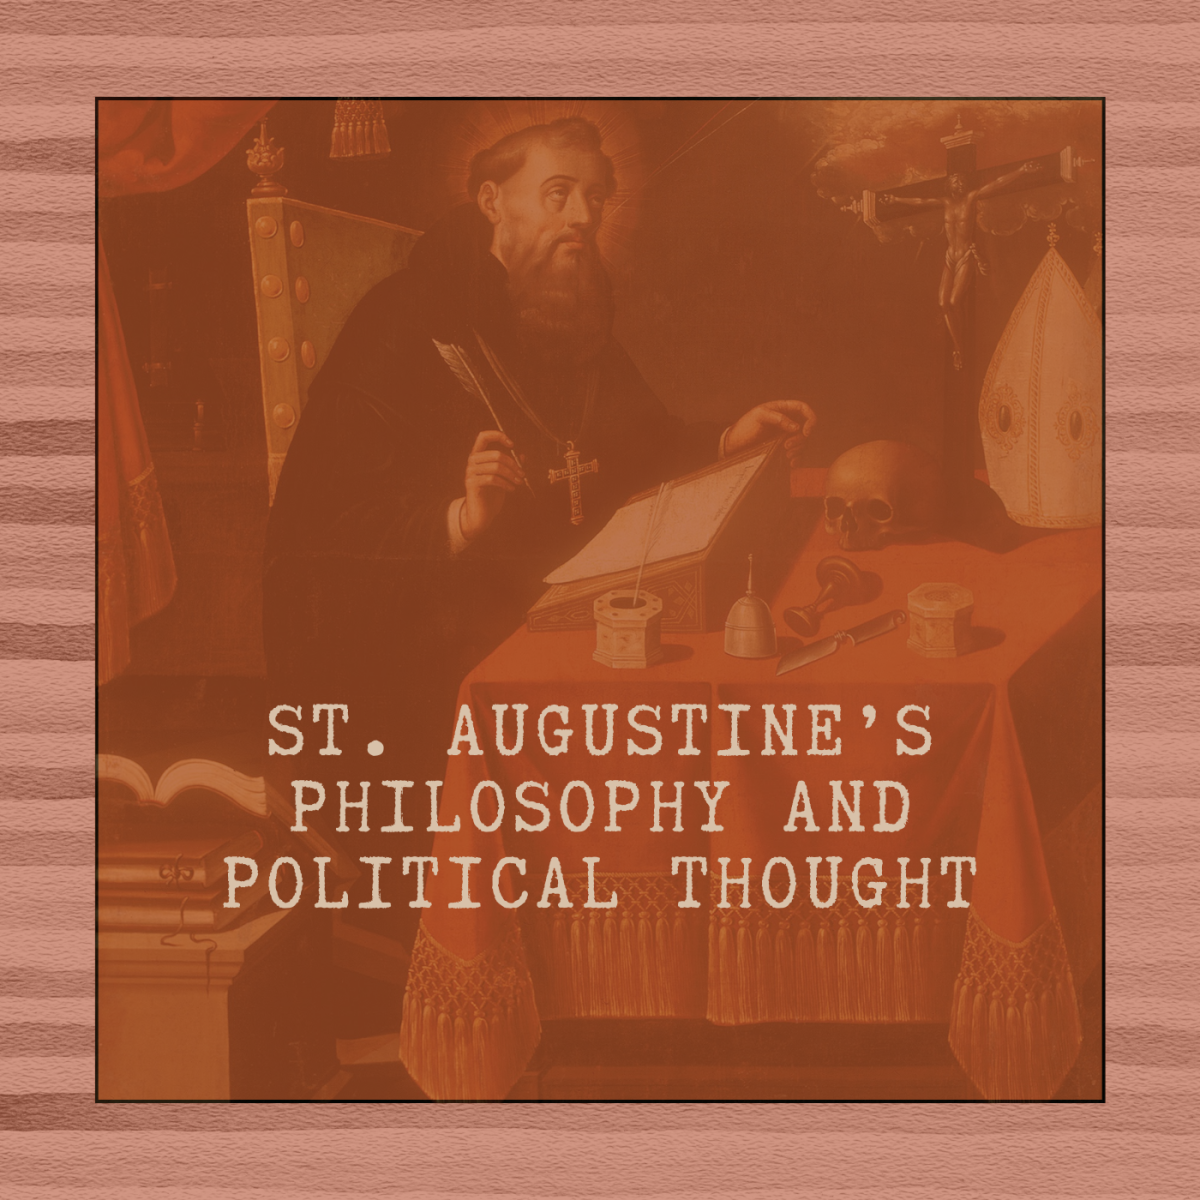 St. Augustine's Philosophy and Political Thought